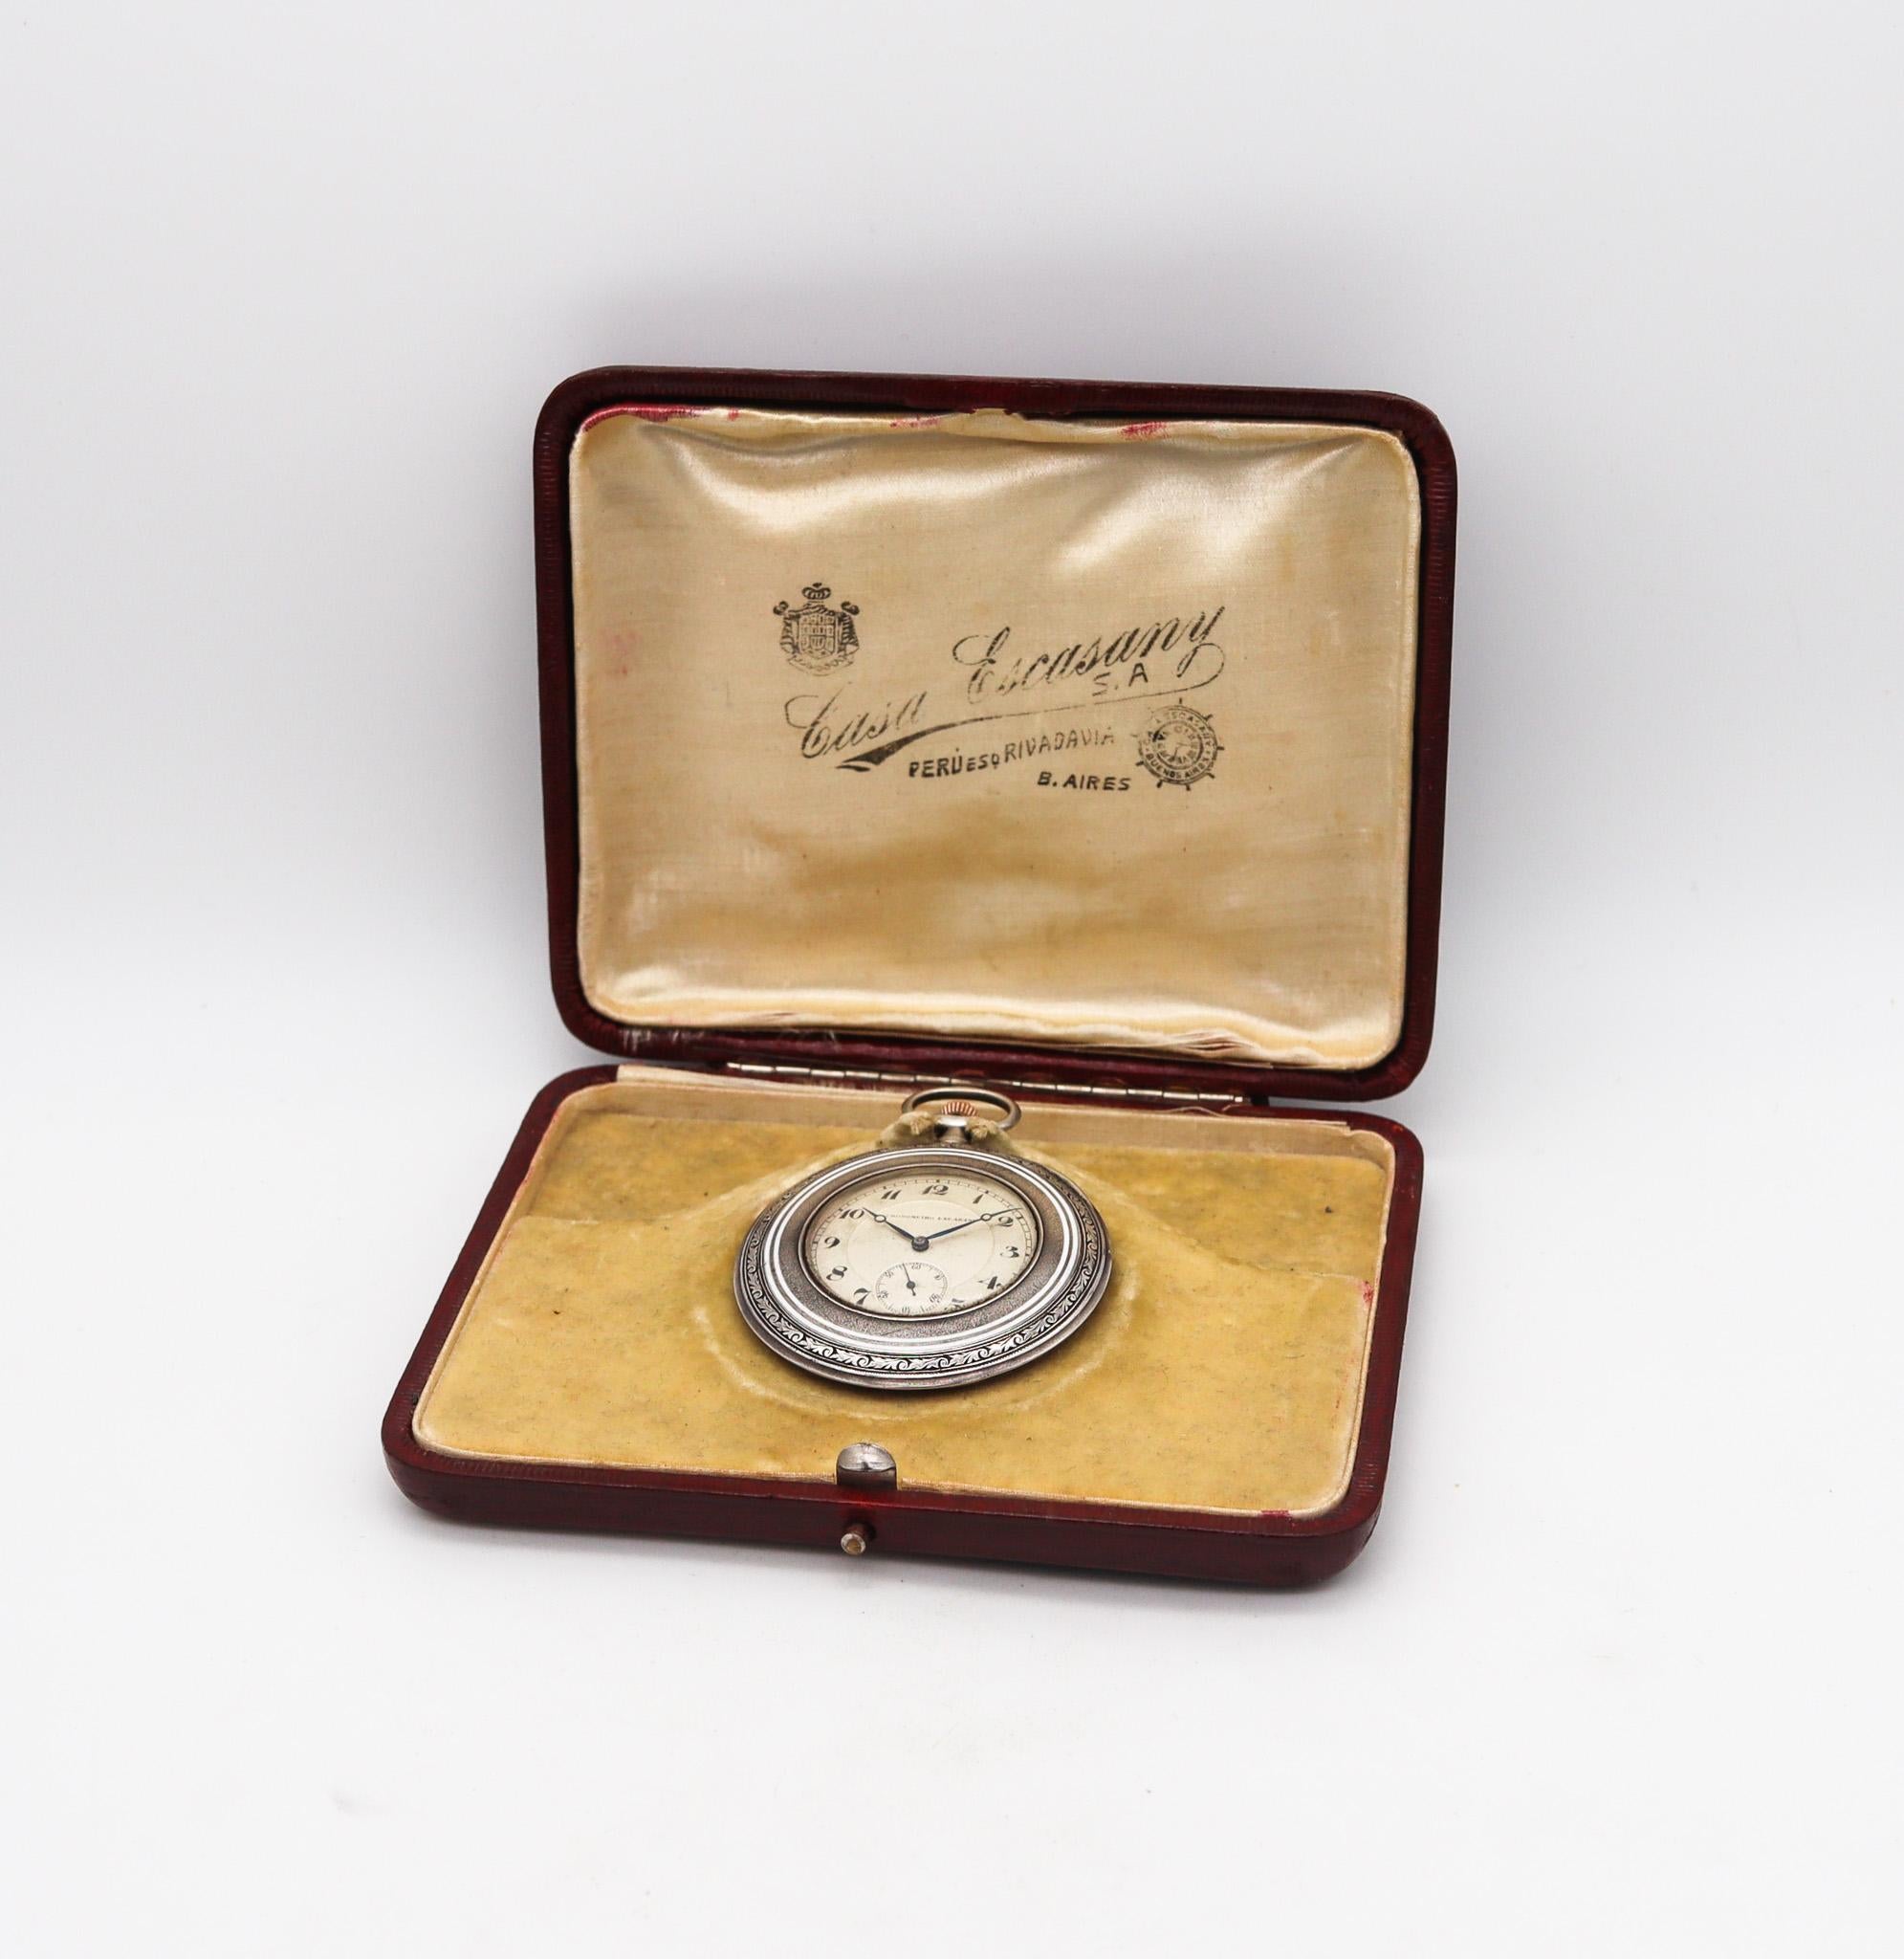 An Edwardian pocket watch by George Stockwell & Co.

An amazing and very beautiful piece, created during the Edwardian period, back in the 1911. The movement was made in Switzerland and the case by the London importer and retailer George Stockwell &